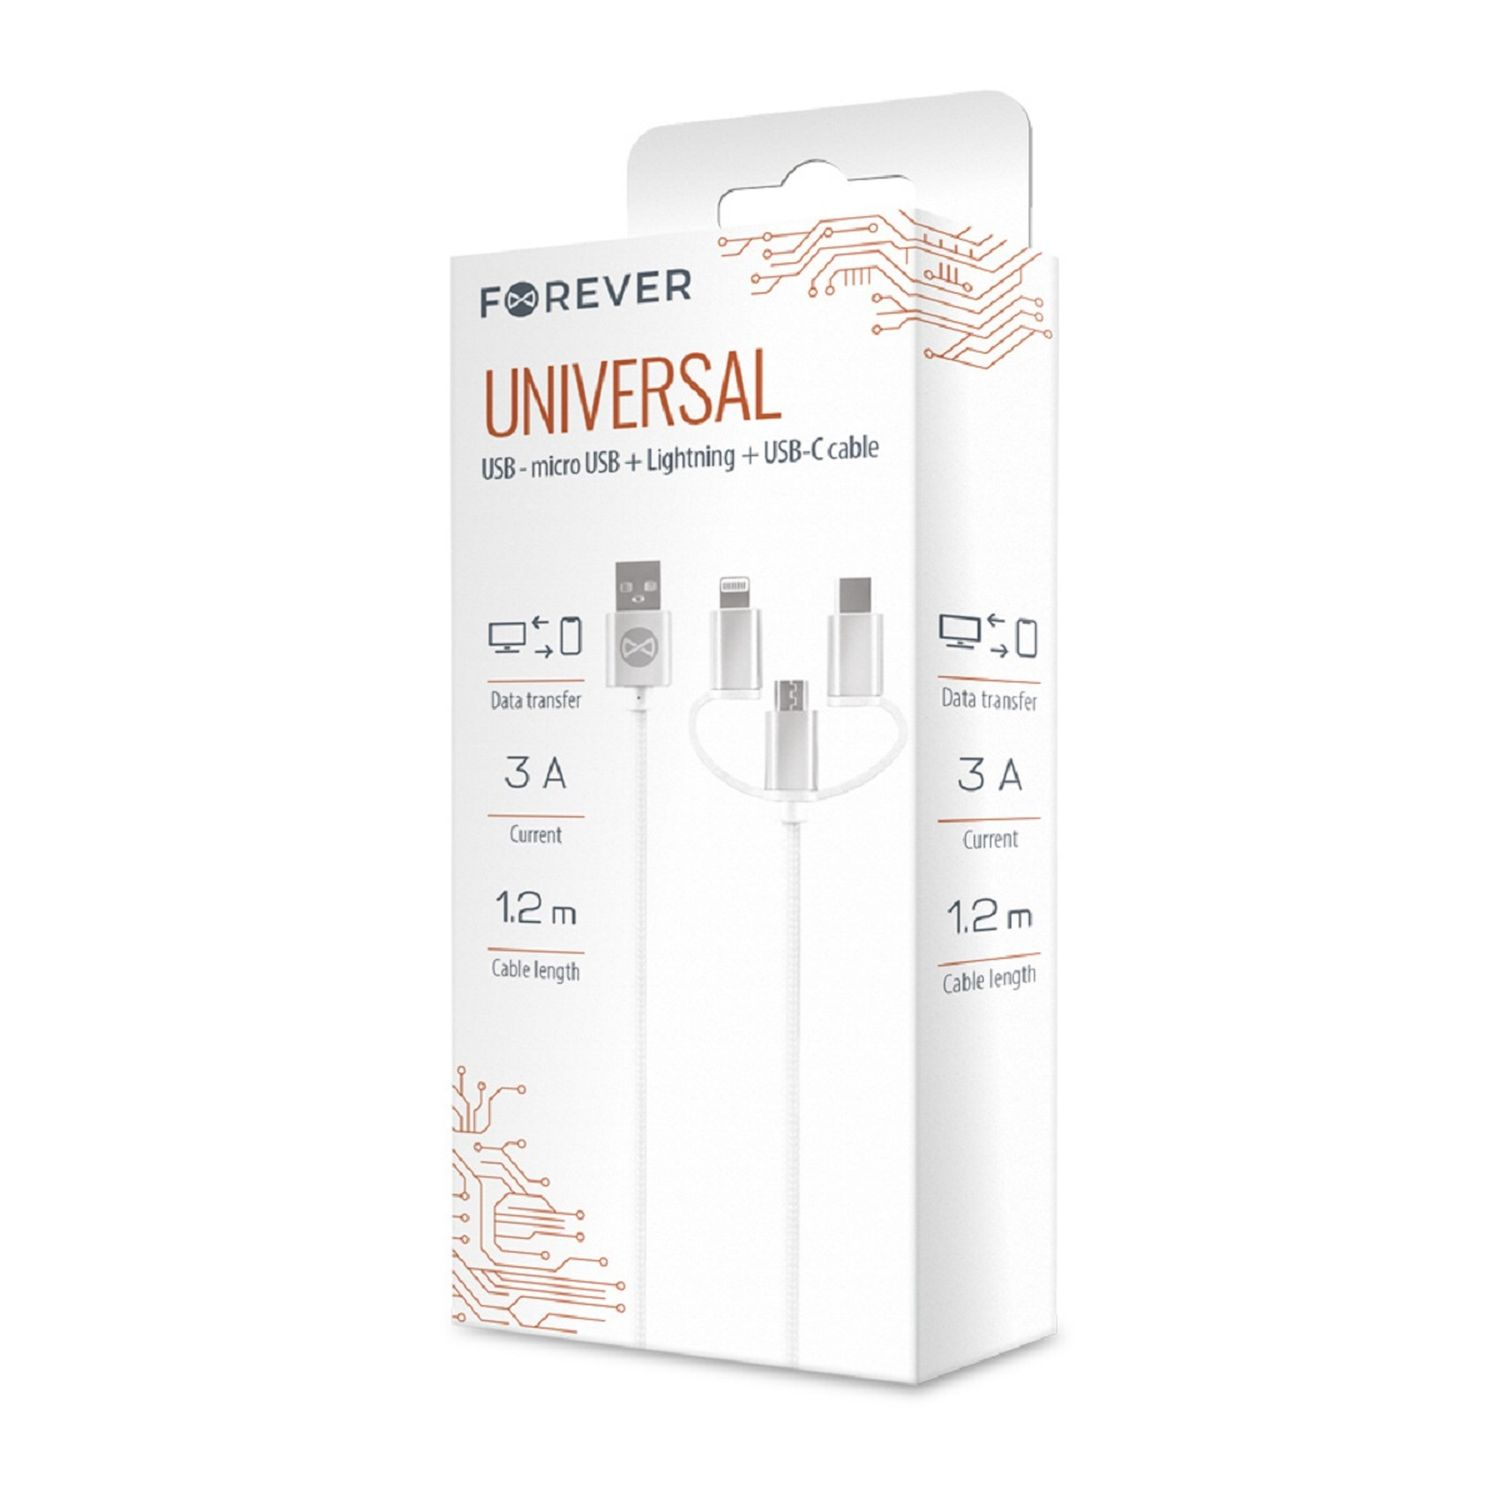 Weiß + - Ladekabel, 3in1 microUSB FOREVER iPhone 1,2m, + USB-C USB